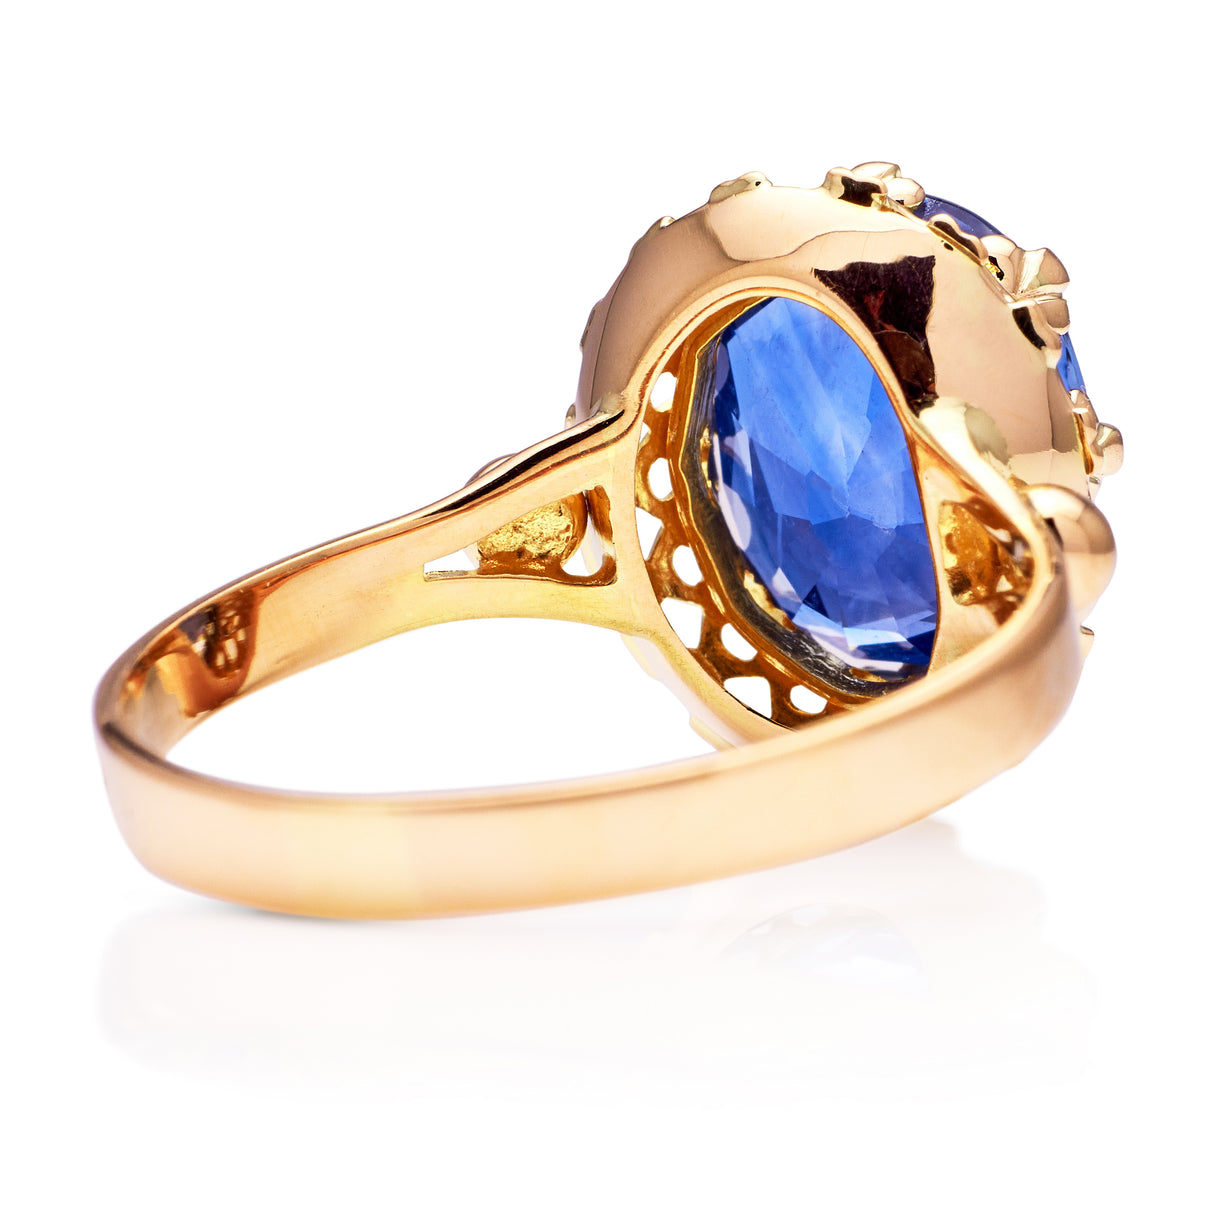 Vintage sapphire engagement ring, rear view